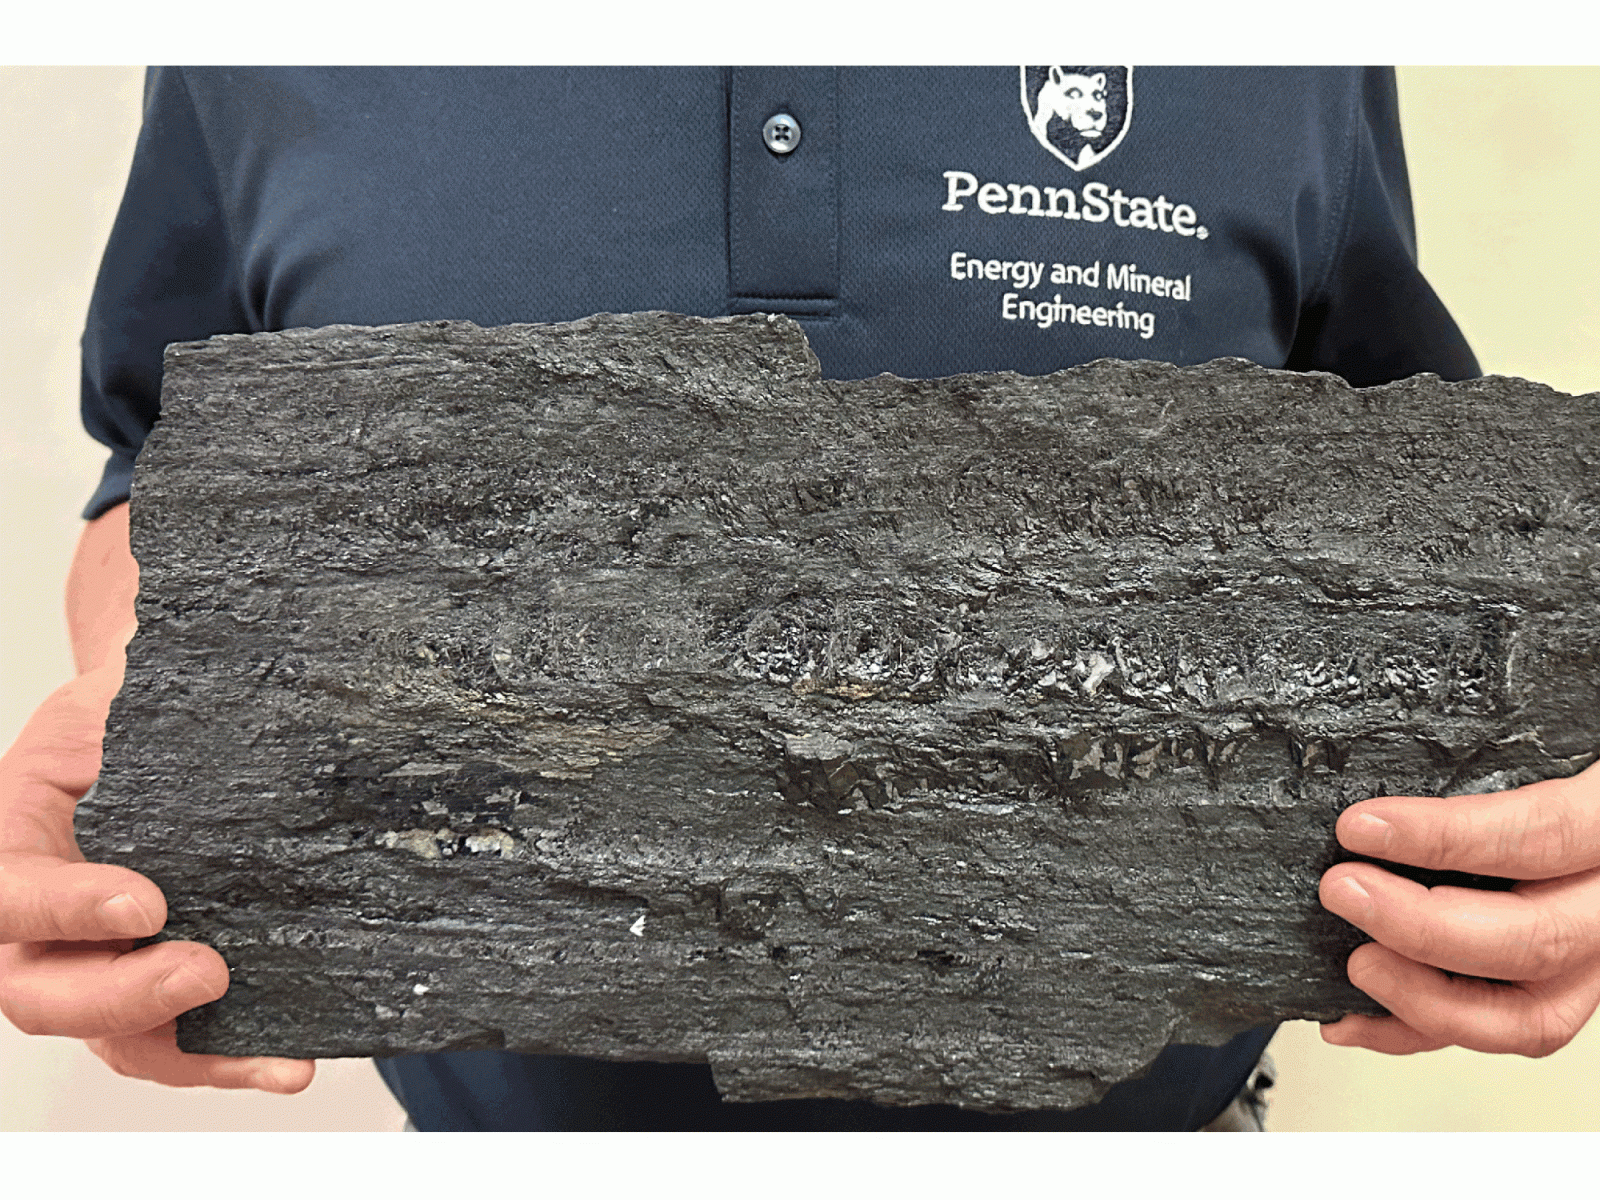 A Penn State researcher holds a large piece of coal.